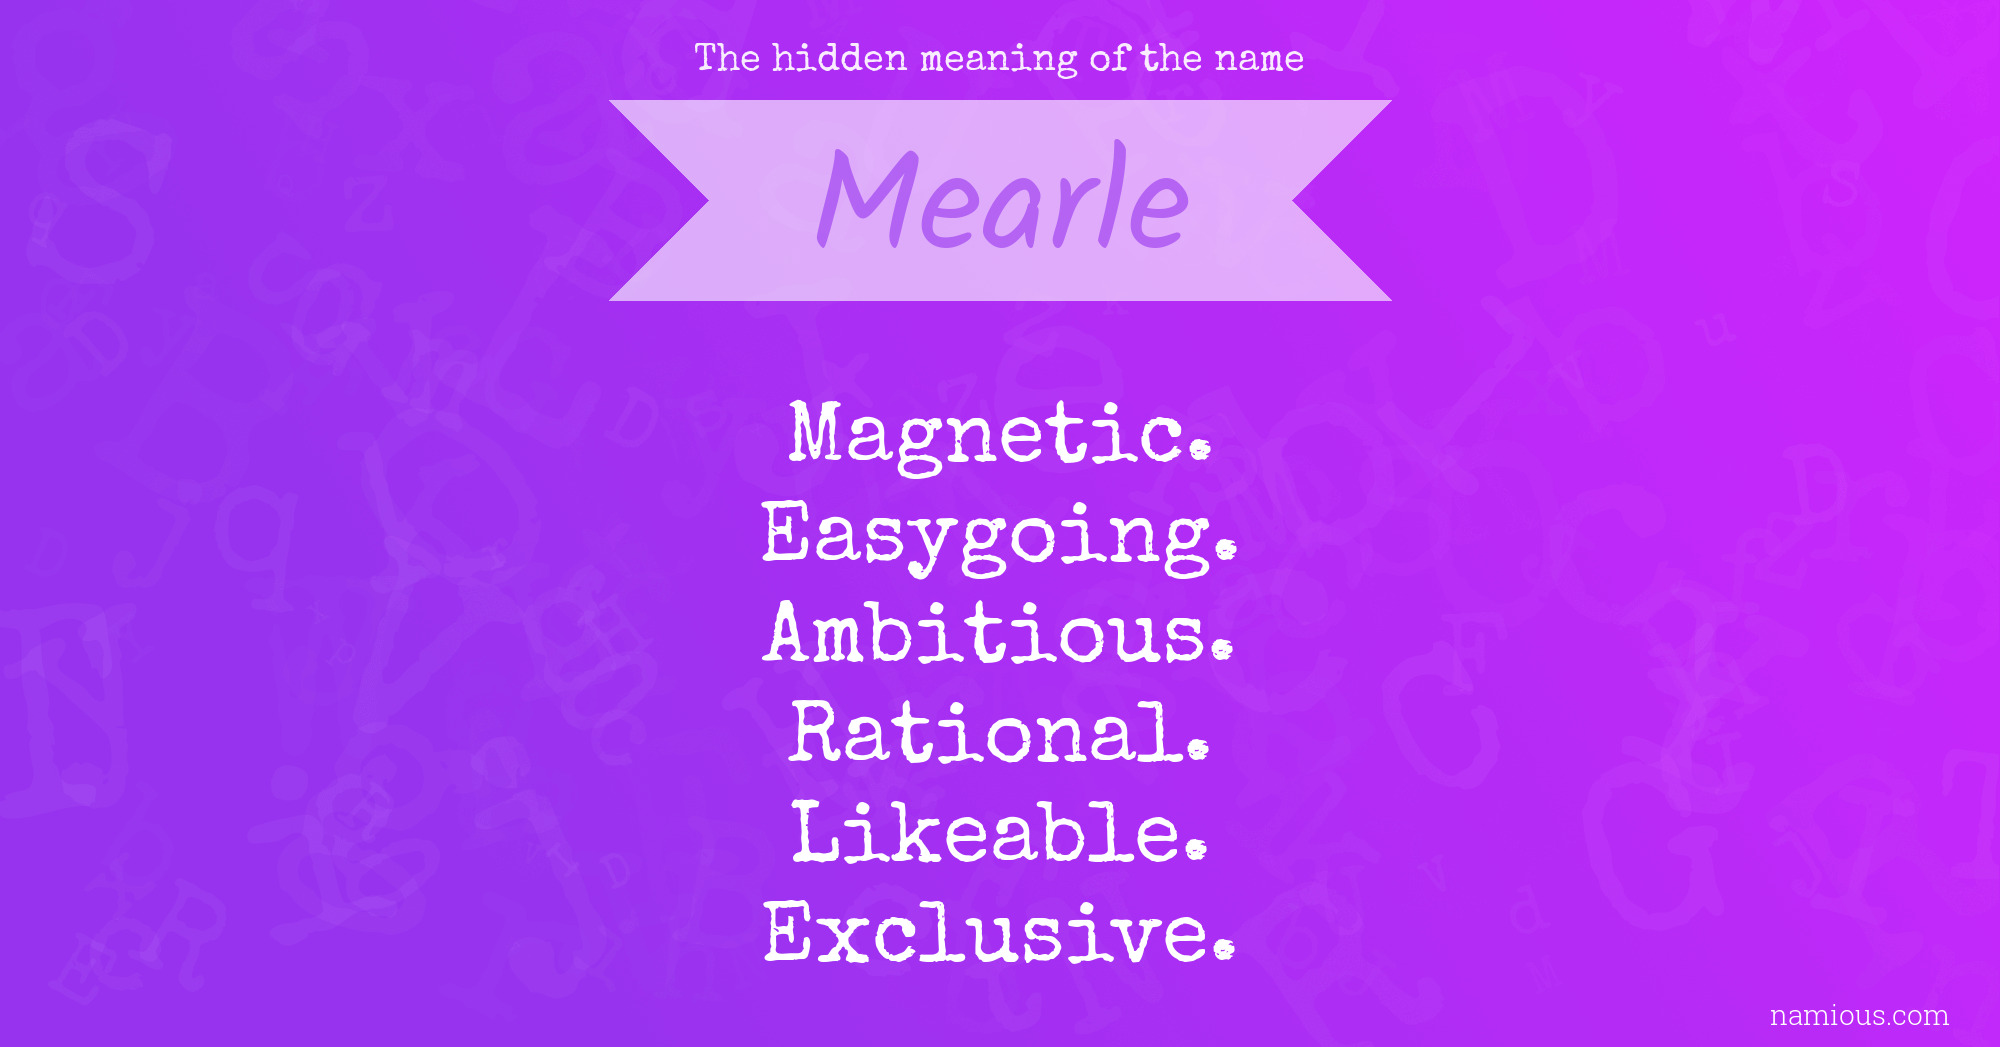 The hidden meaning of the name Mearle